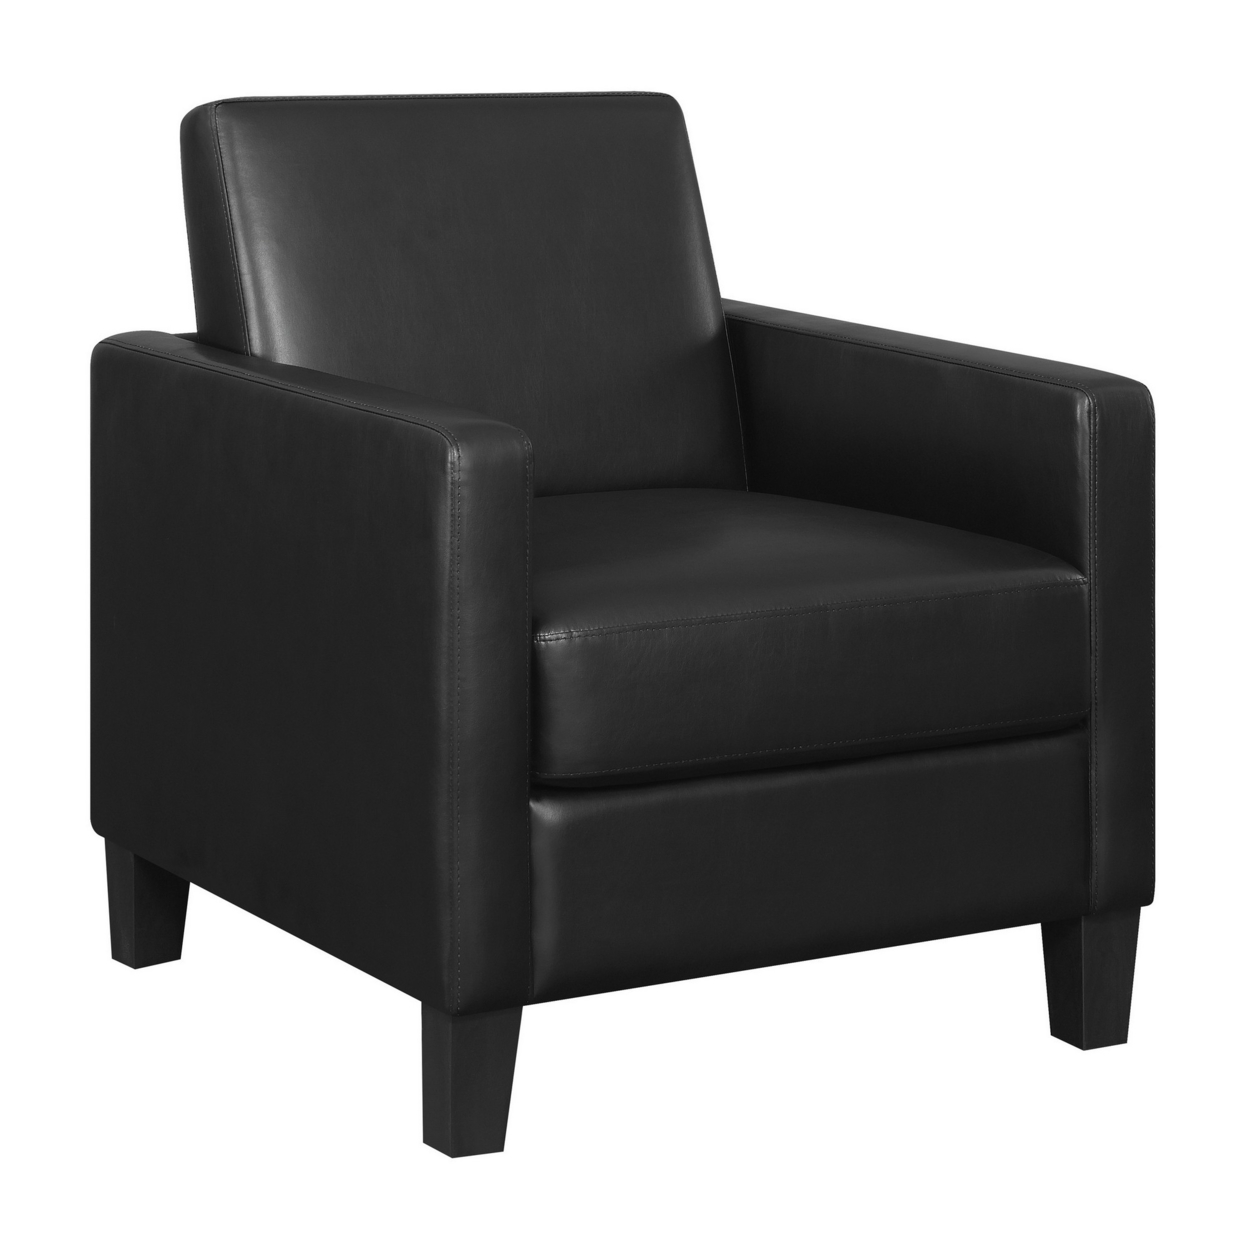 34 Inch Modern Accent Chair, Angled Back, Modern Style, Black Faux Leather- Saltoro Sherpi